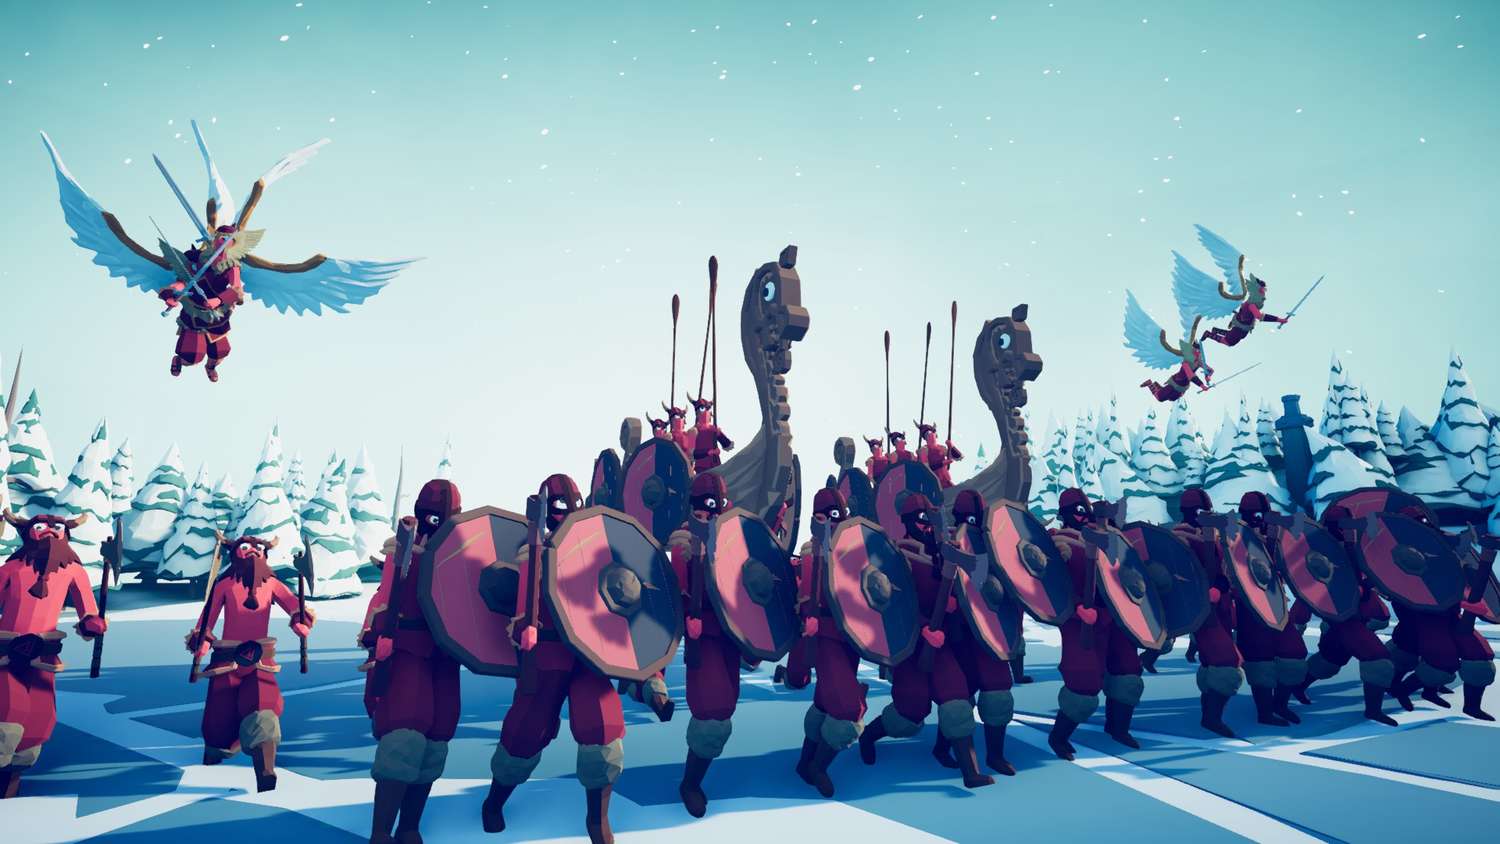 Постер Totally Accurate Battle Simulator / СИМУЛЯТОР БИТВЫ [v20.05.2019] (2019) PC Early Access